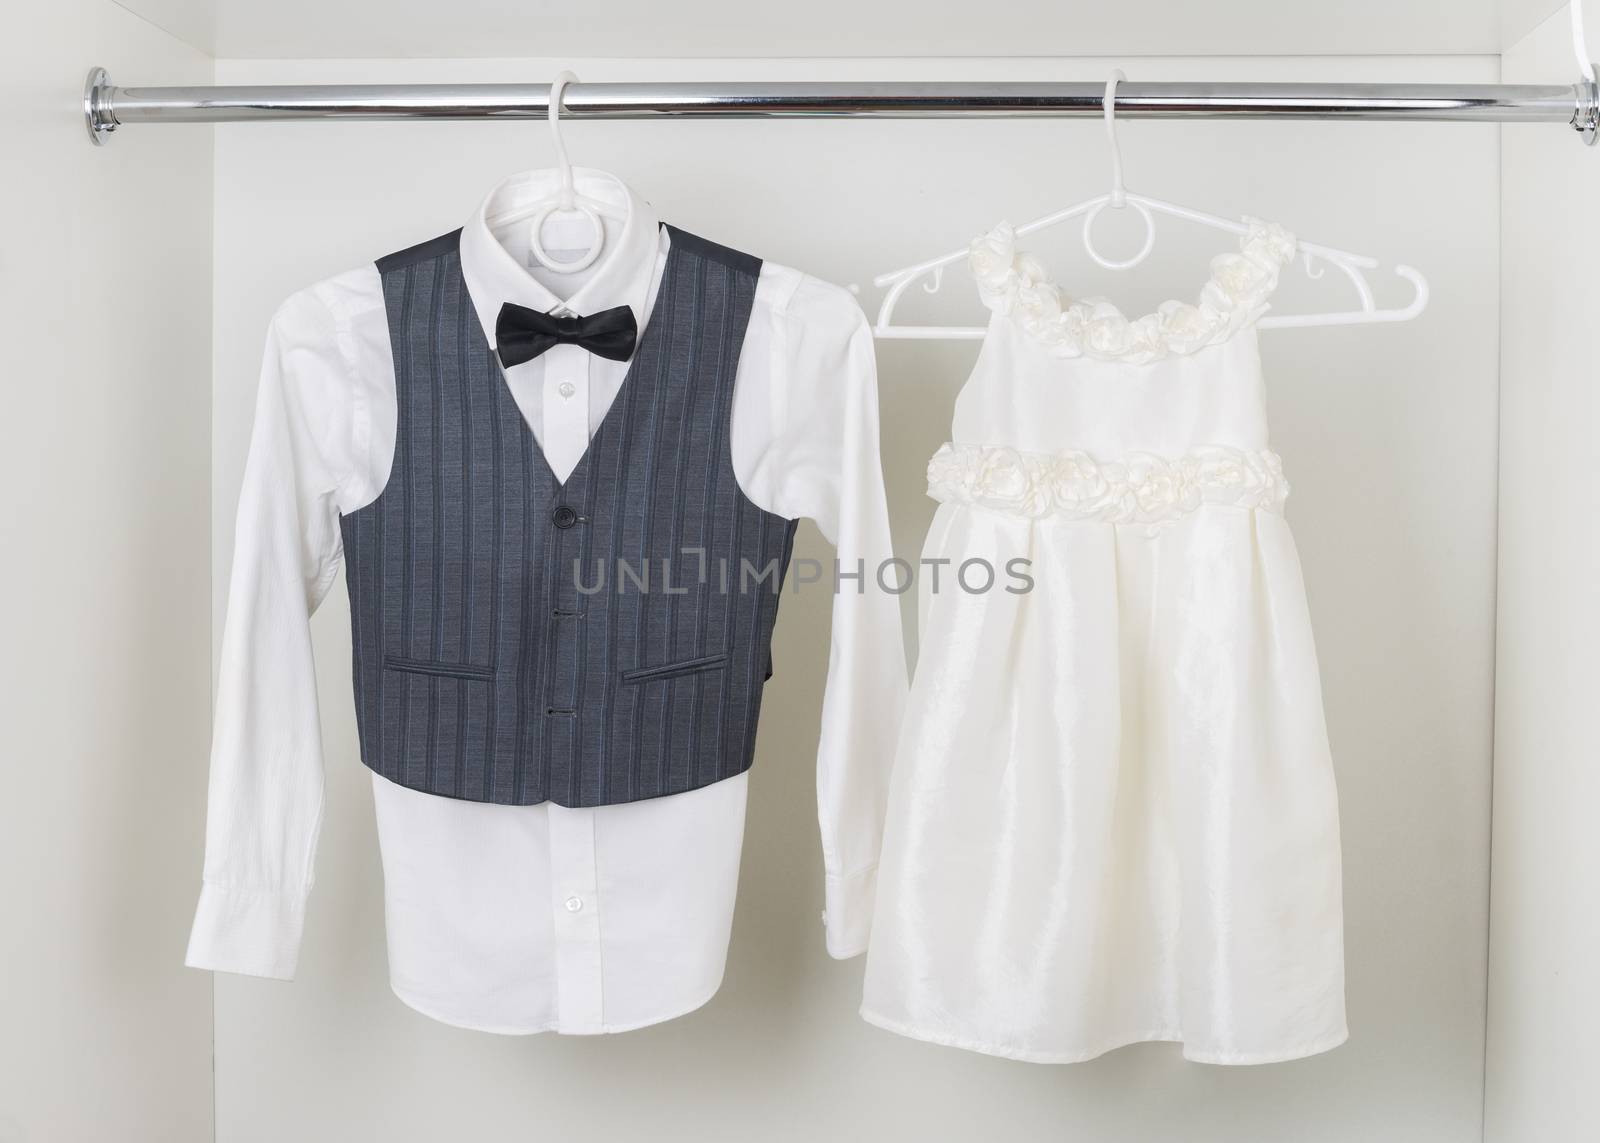 white  boy's shirt with black bow tie, vest and white elegant a little girl  dress hanging on hangers in the white wardrobe, clothes for the holiday, ceremony, wedding